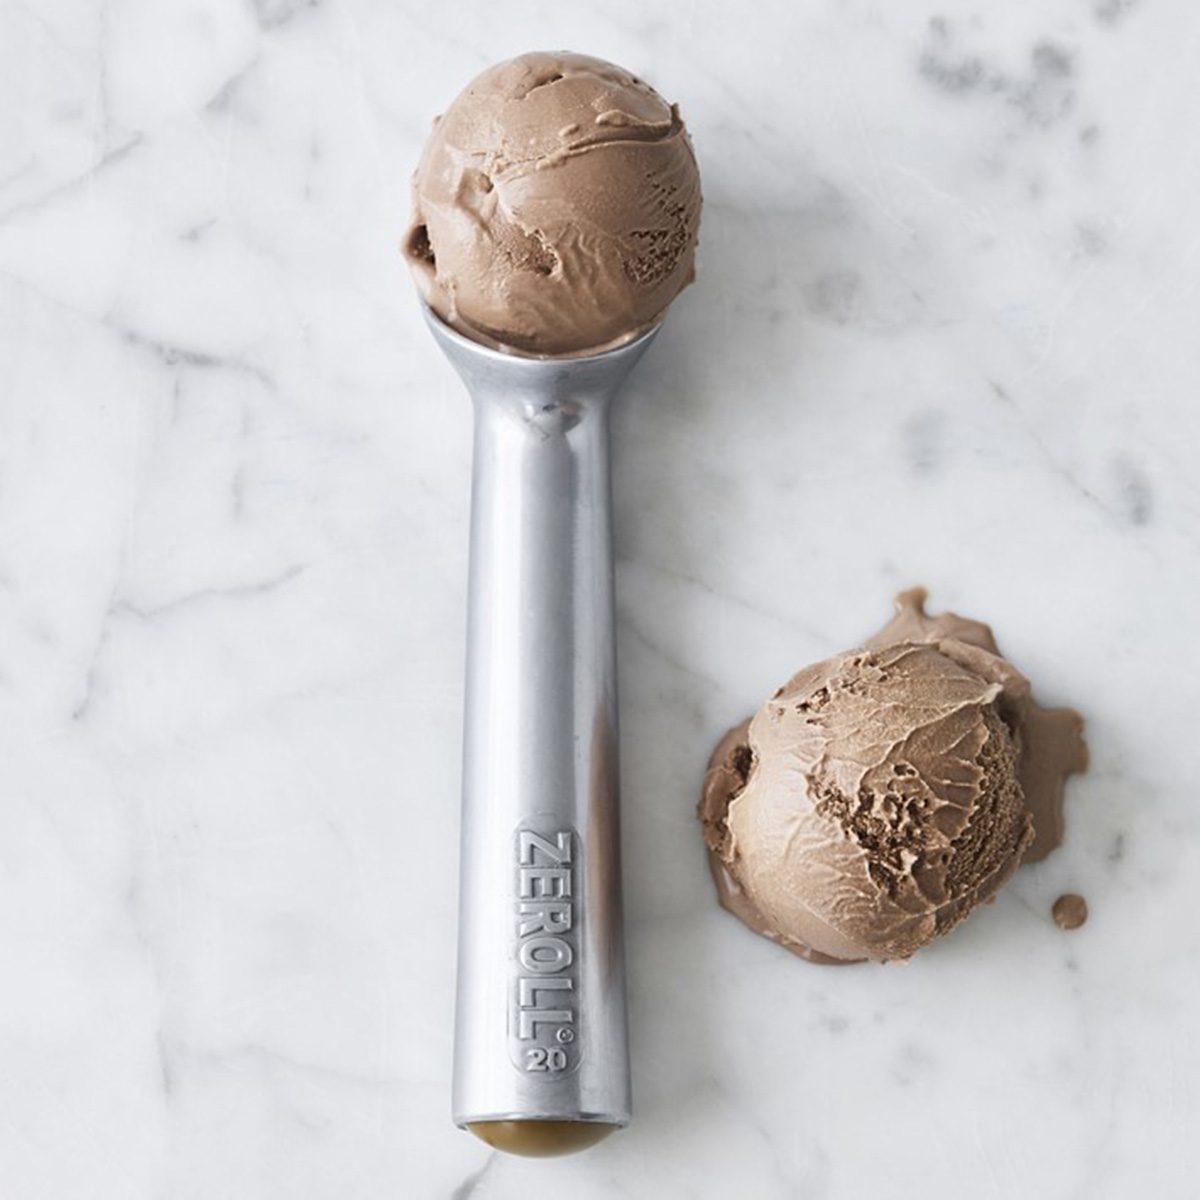 The Best Ice Cream Scoop You Can Buy [Our Picks for 2022]